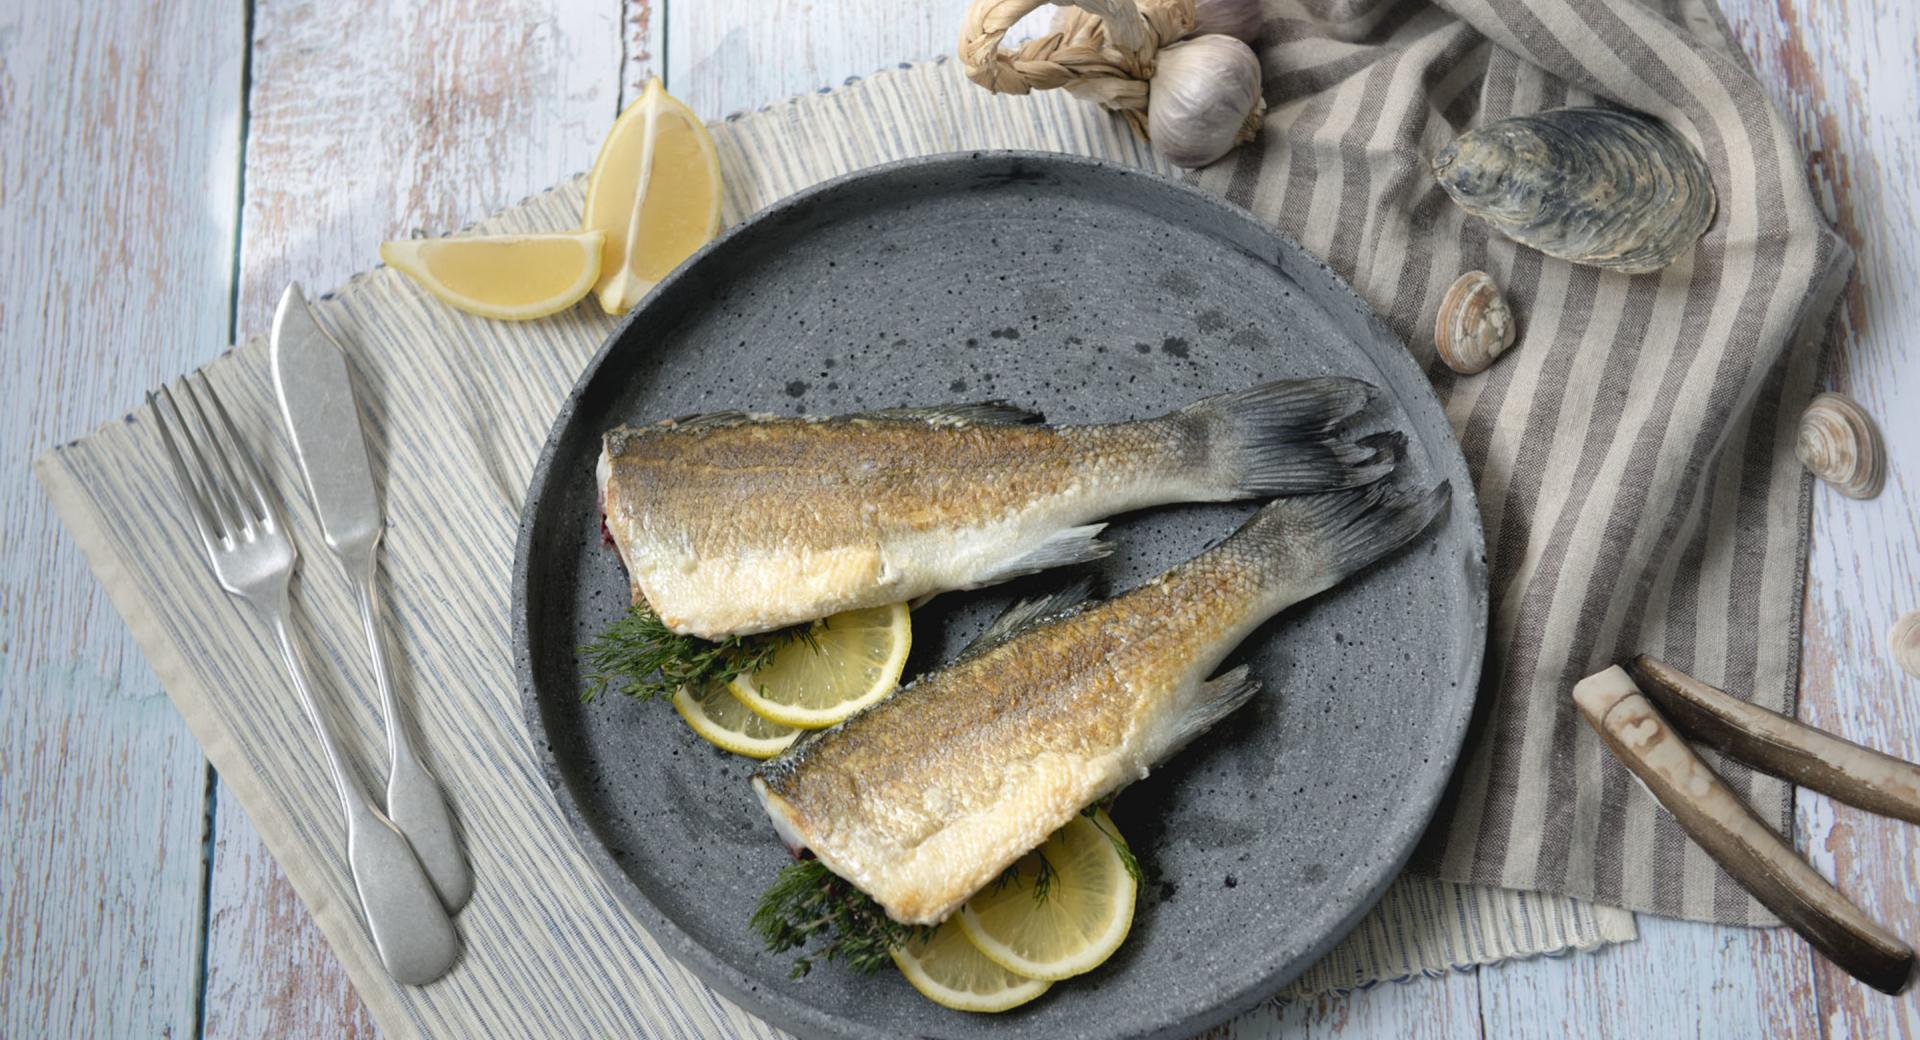 Pan-seared fish with lemon butter